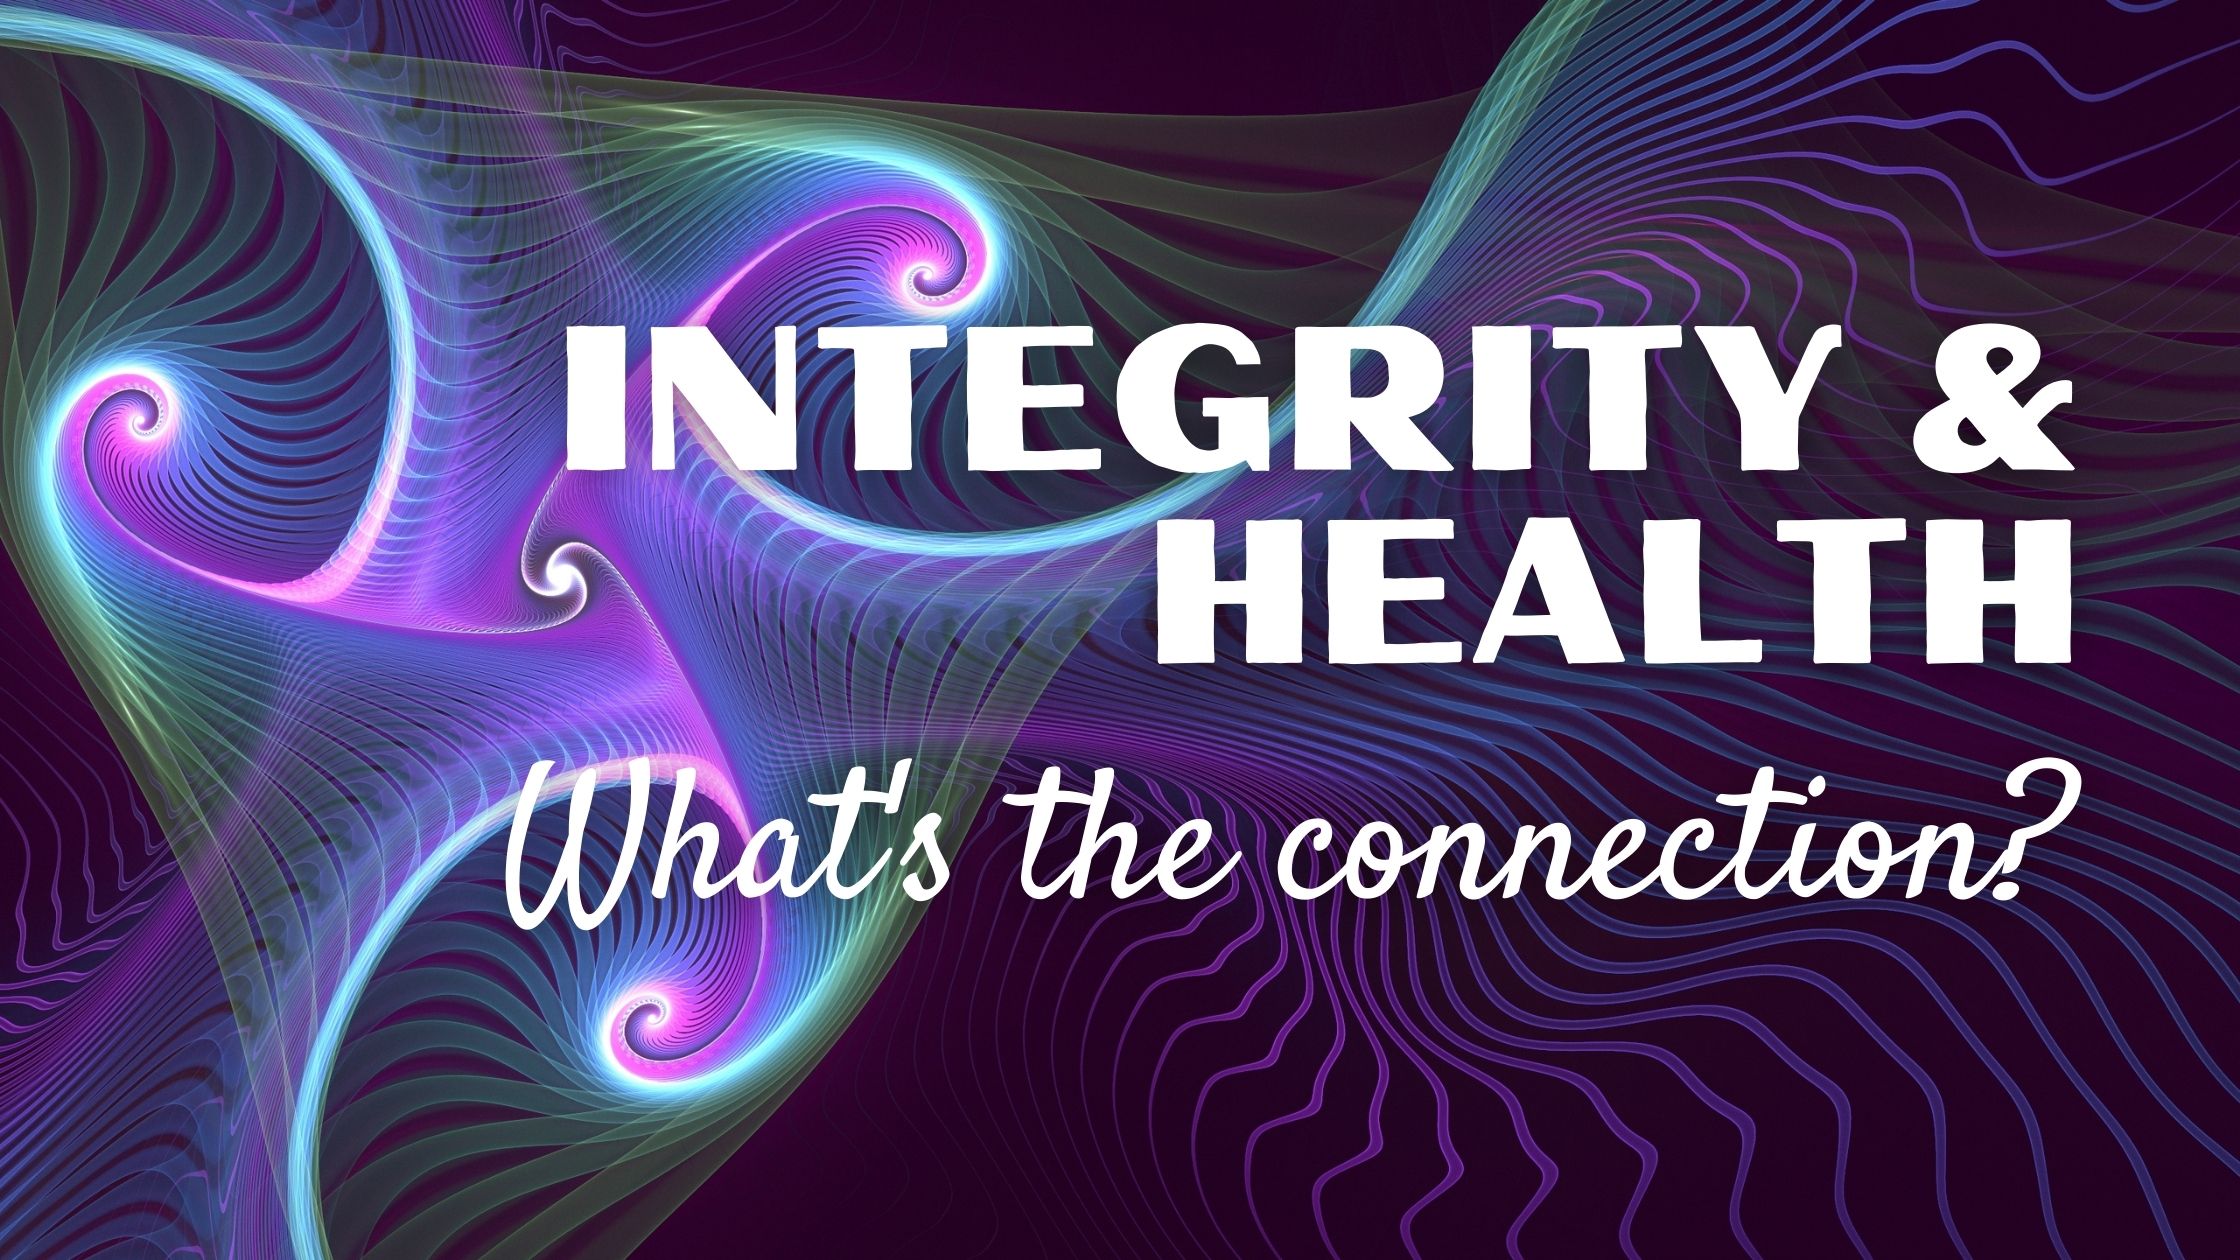 Integrity and health: What's the connection?